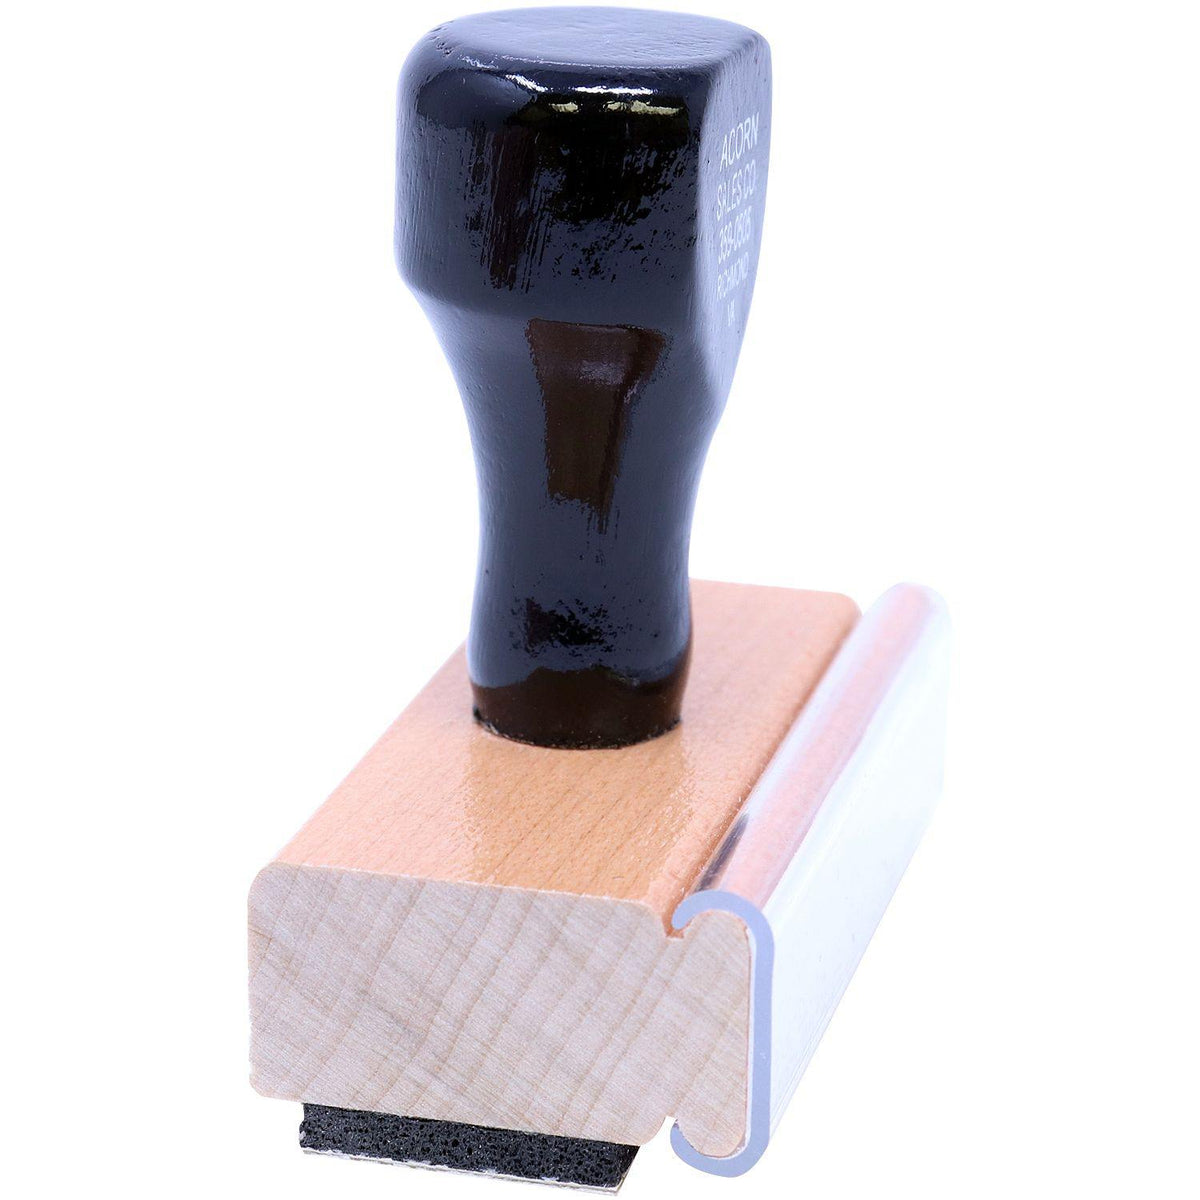 Side View of Classified Rubber Stamp at an Angle